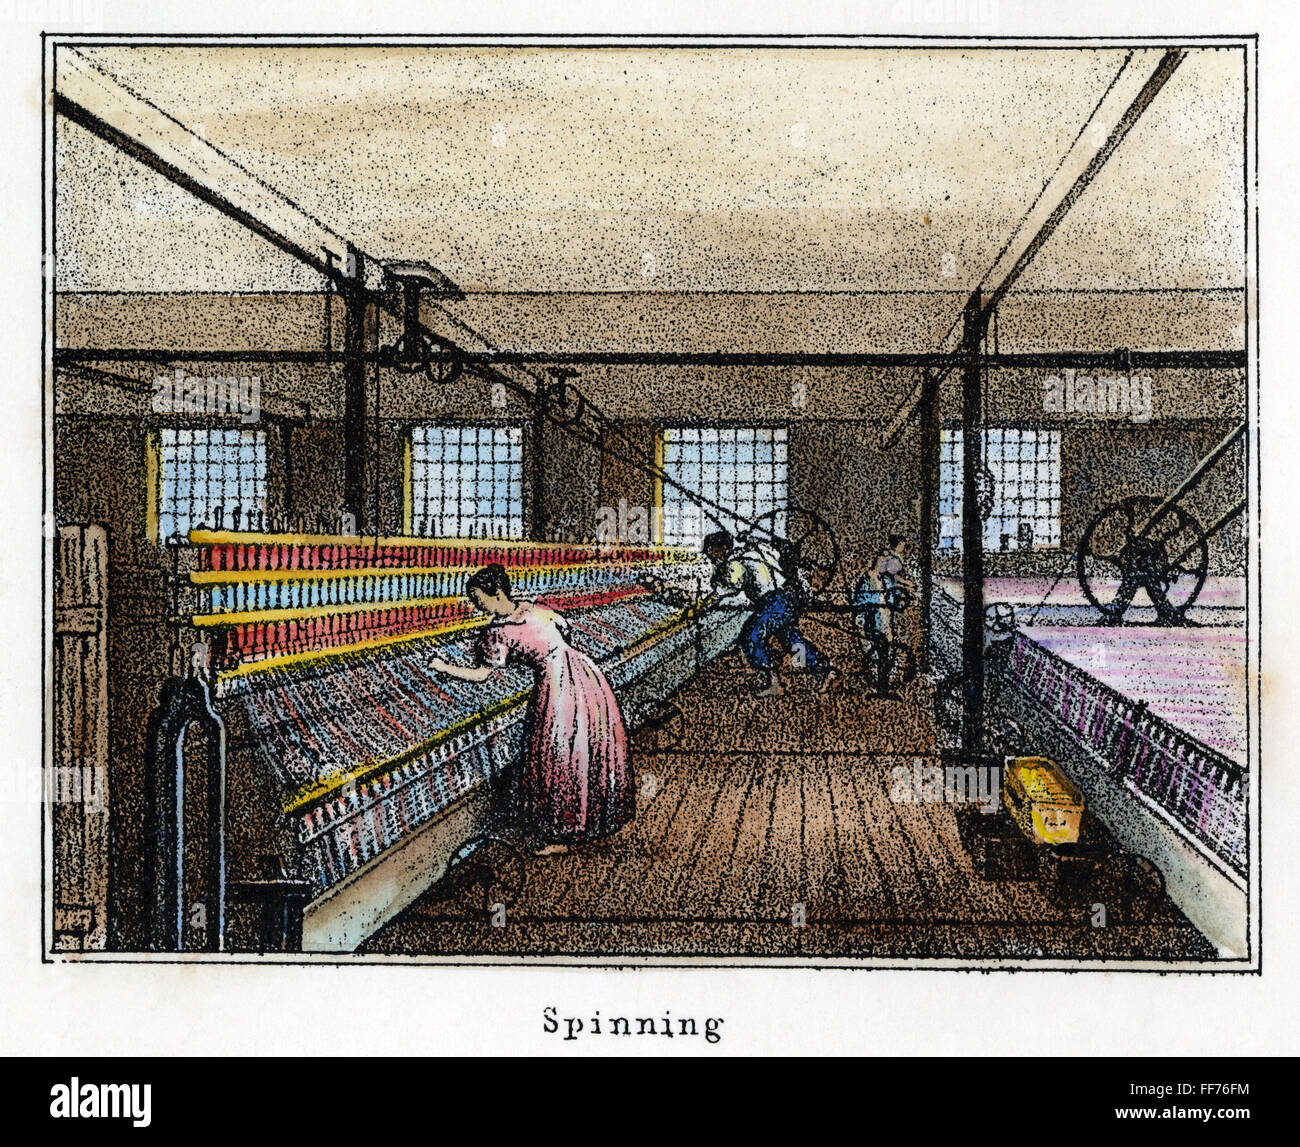 TEXTILE MANUFACTURE, c1836. /nMule spinning. Interior view of a New England cotton manufactures mill. Lithograph, c1836. Stock Photo